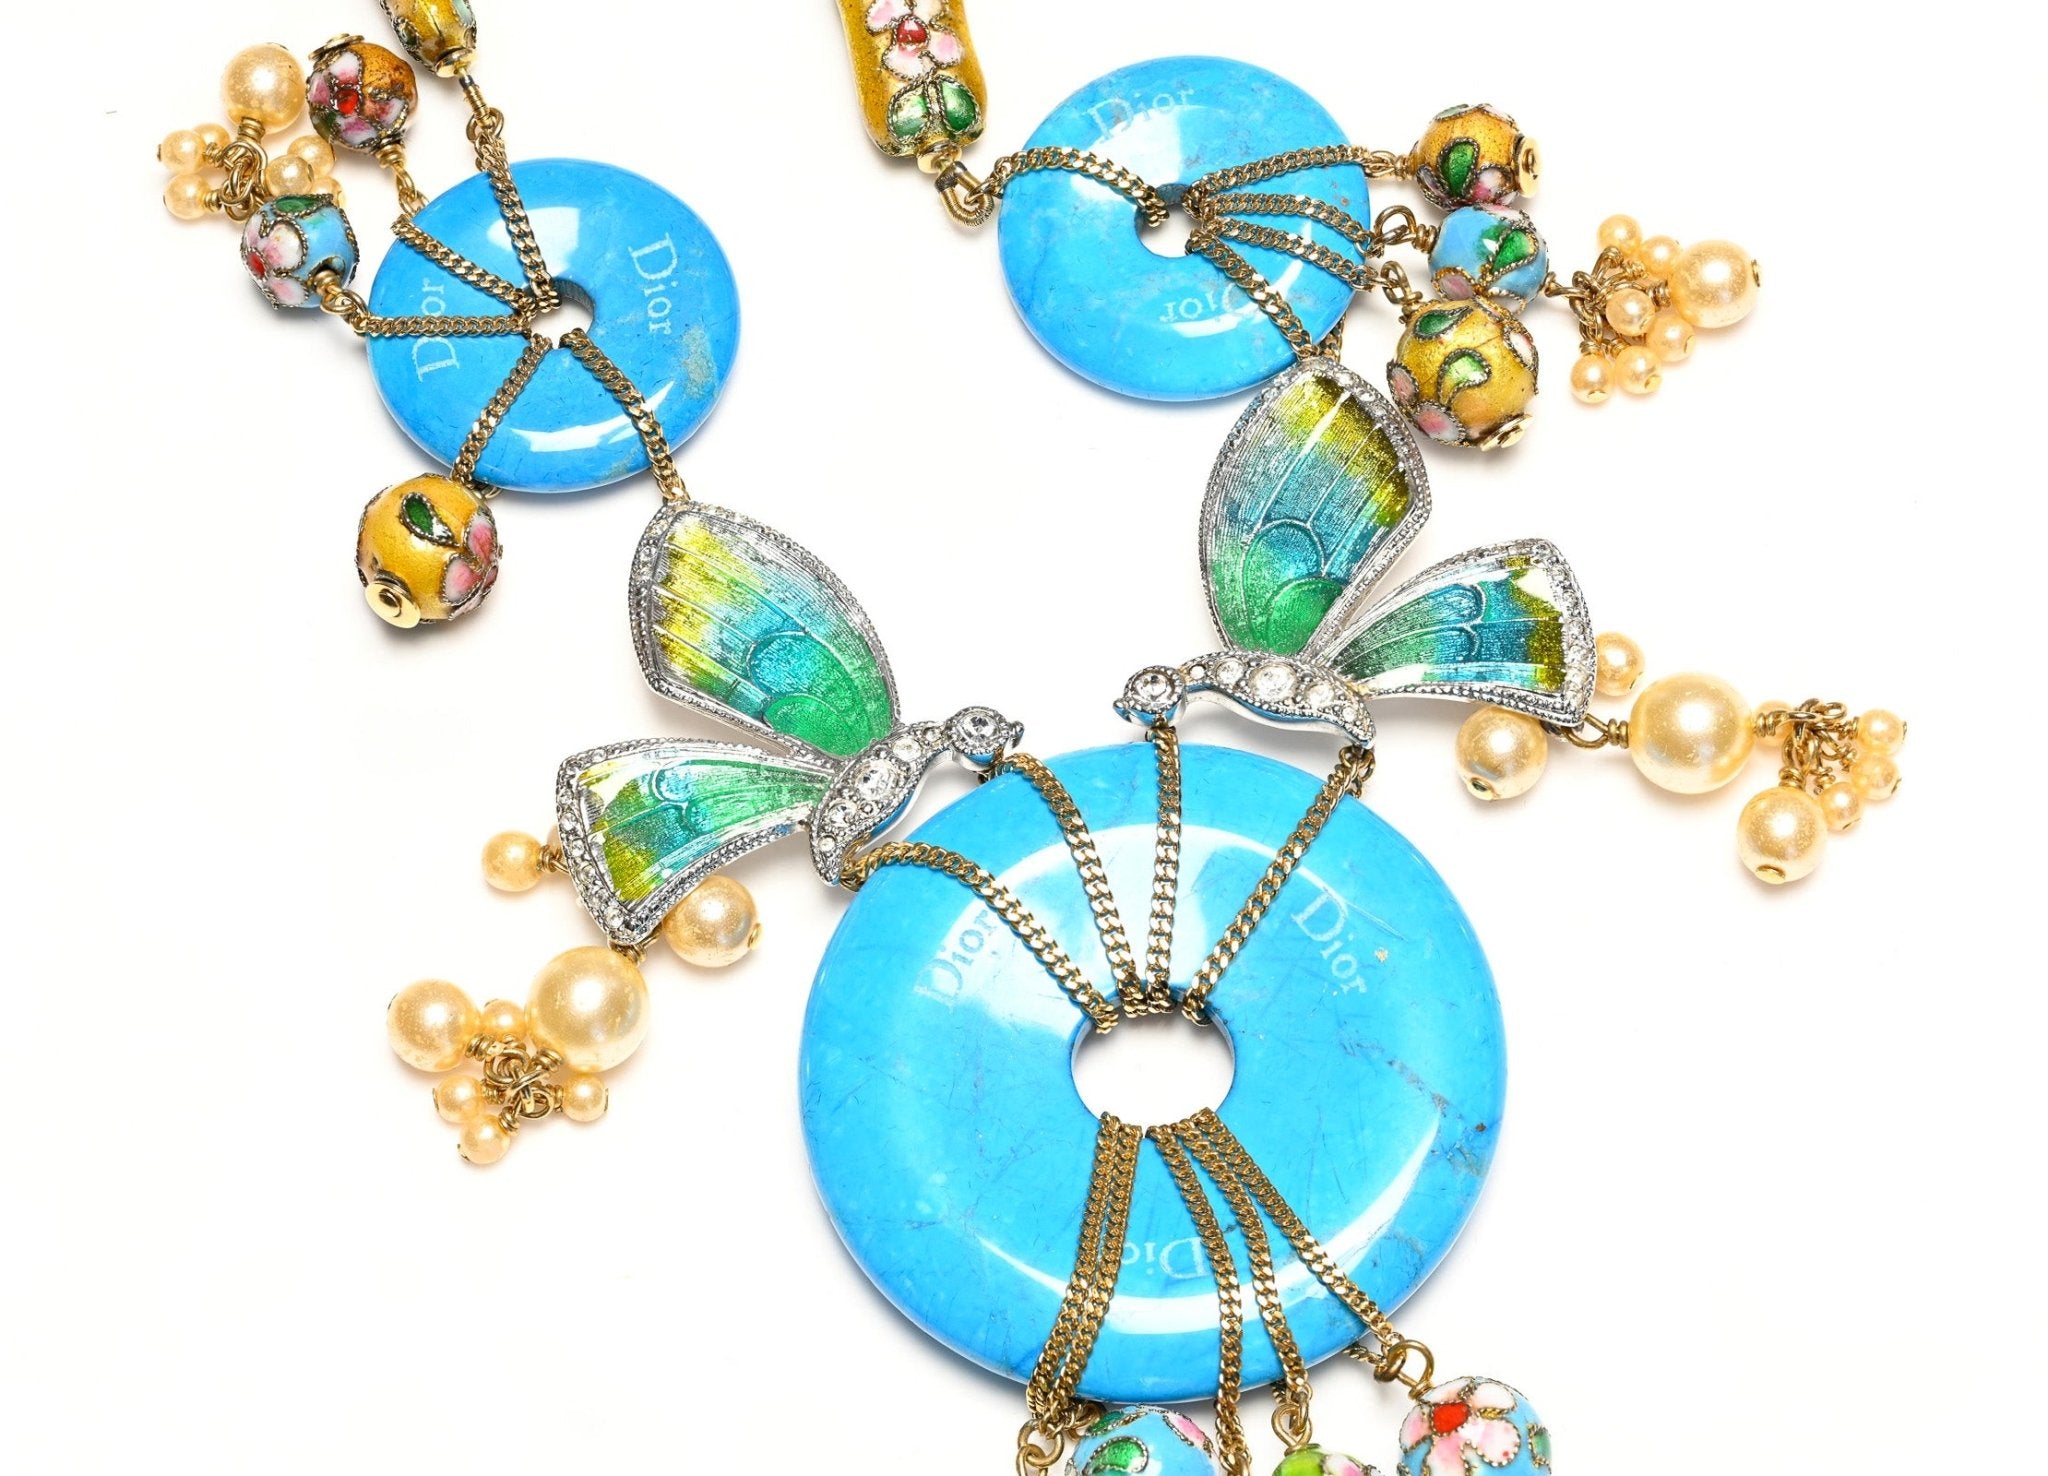 Vintage Christian Dior Galliano Tonkidior 2006 Turquoise Beads Enamel Butterfly Necklace